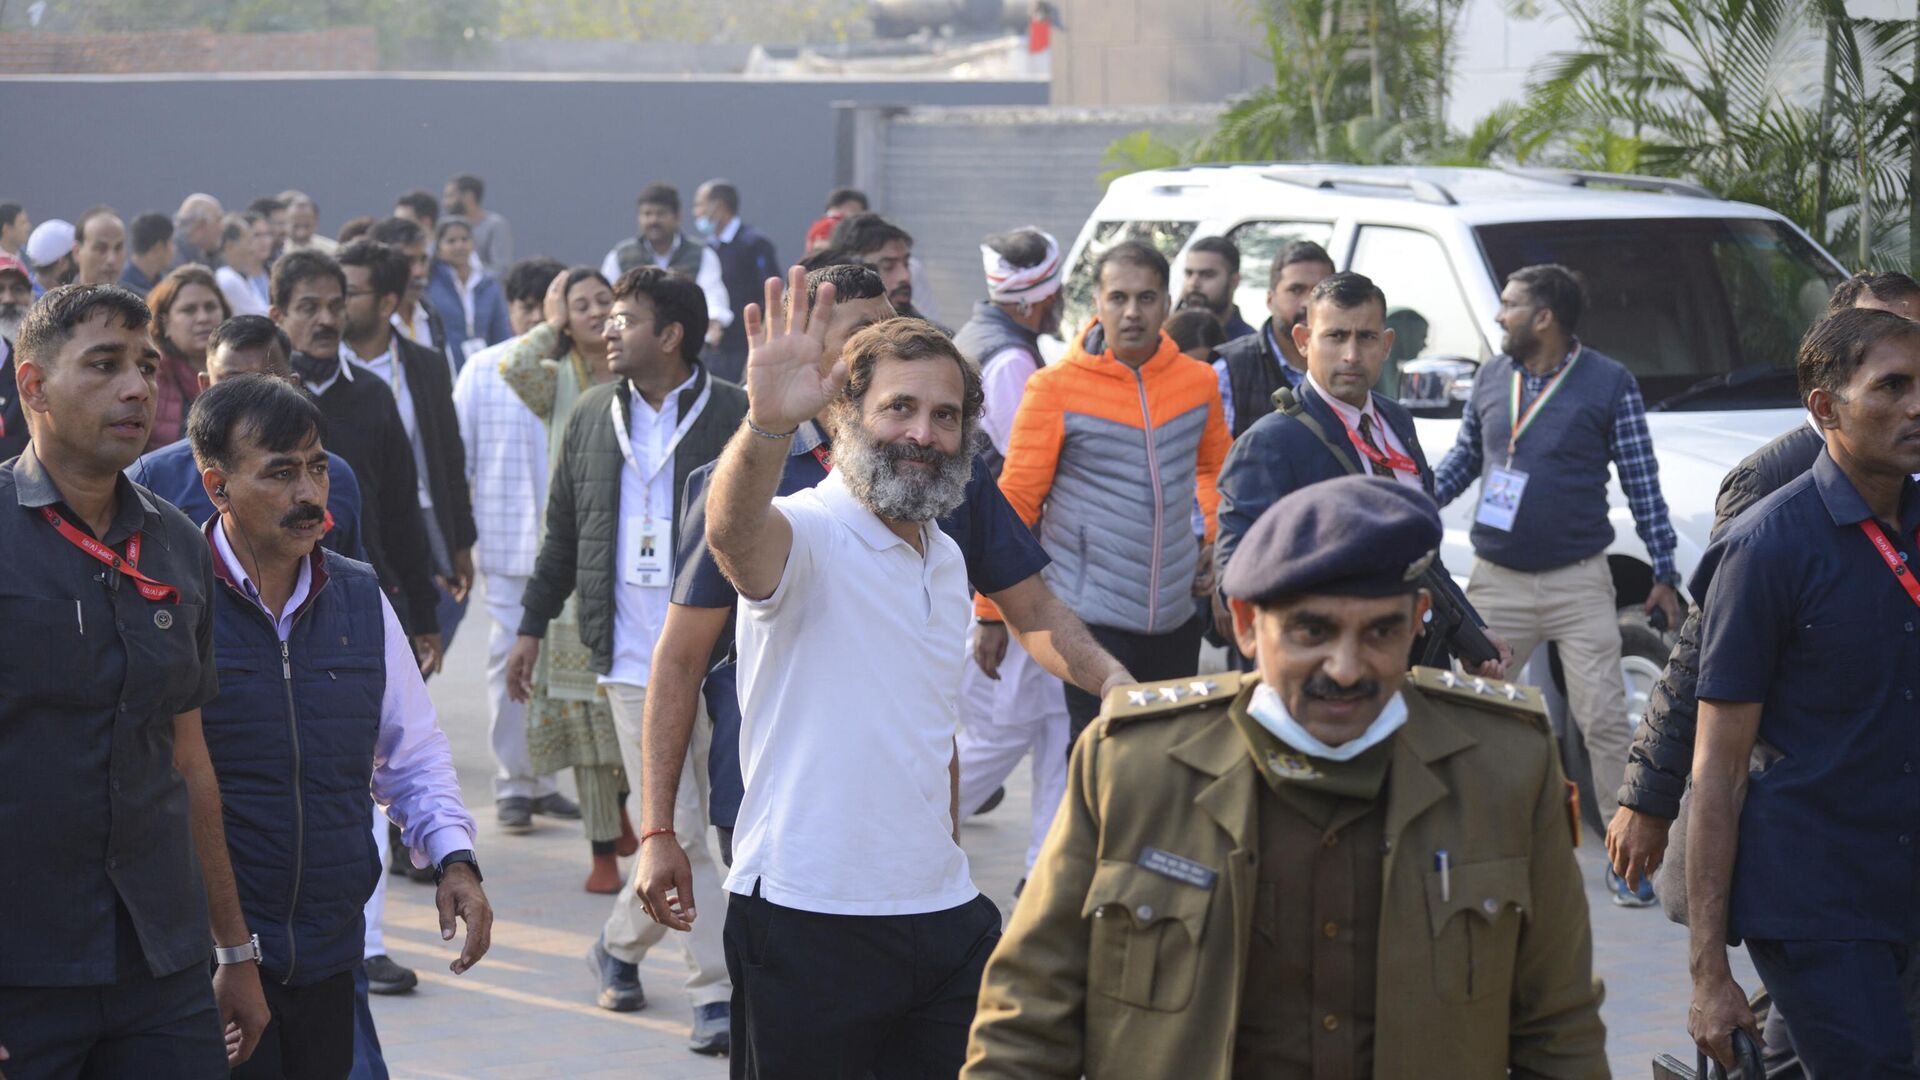 India's Congress party leader Rahul Gandhi (C) takes part in the 'Bharat Jodo Yatra' march in New Delhi on December 24, 2022 - Sputnik India, 1920, 04.01.2023